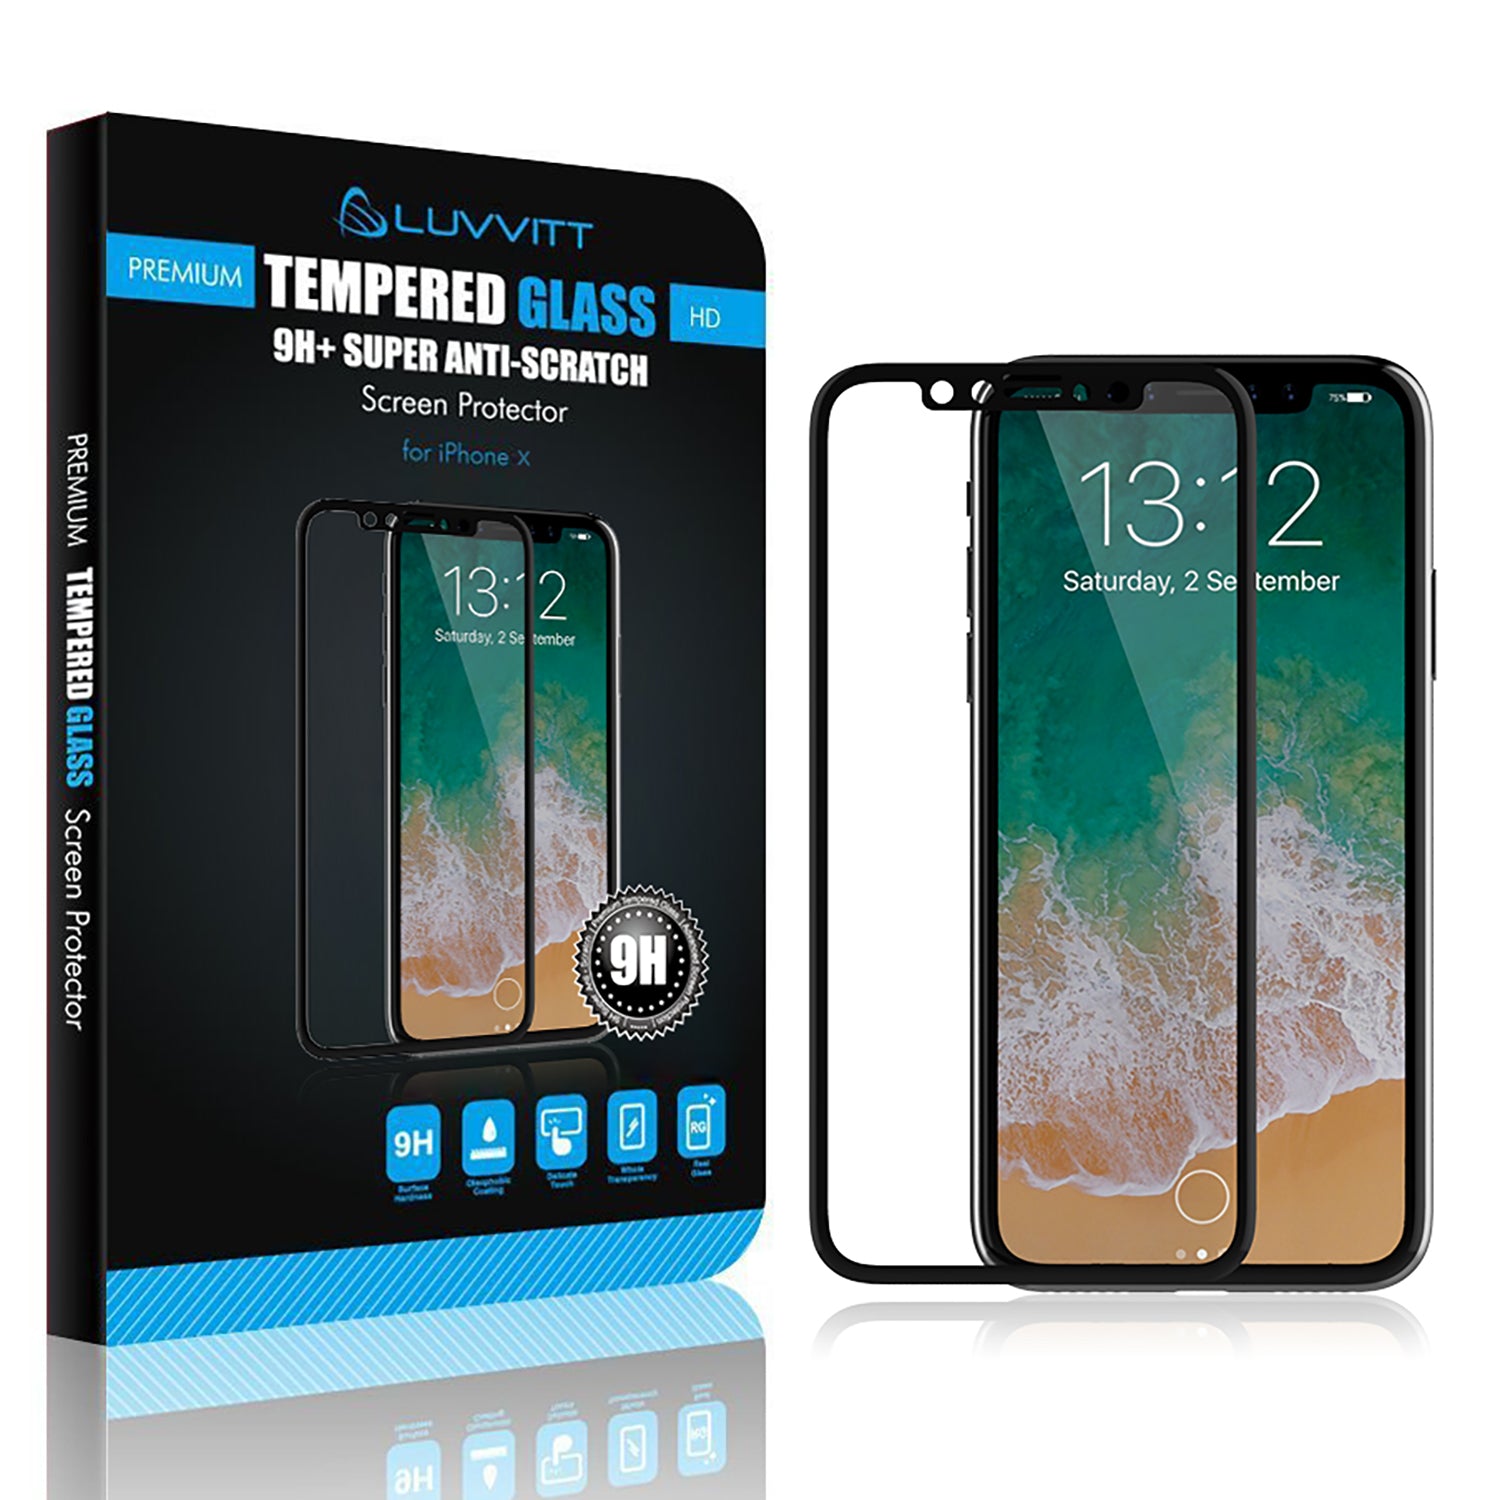 Luvvitt Tempered Glass Screen Protector 3D Case Friendly for iPhone X / XS - Black